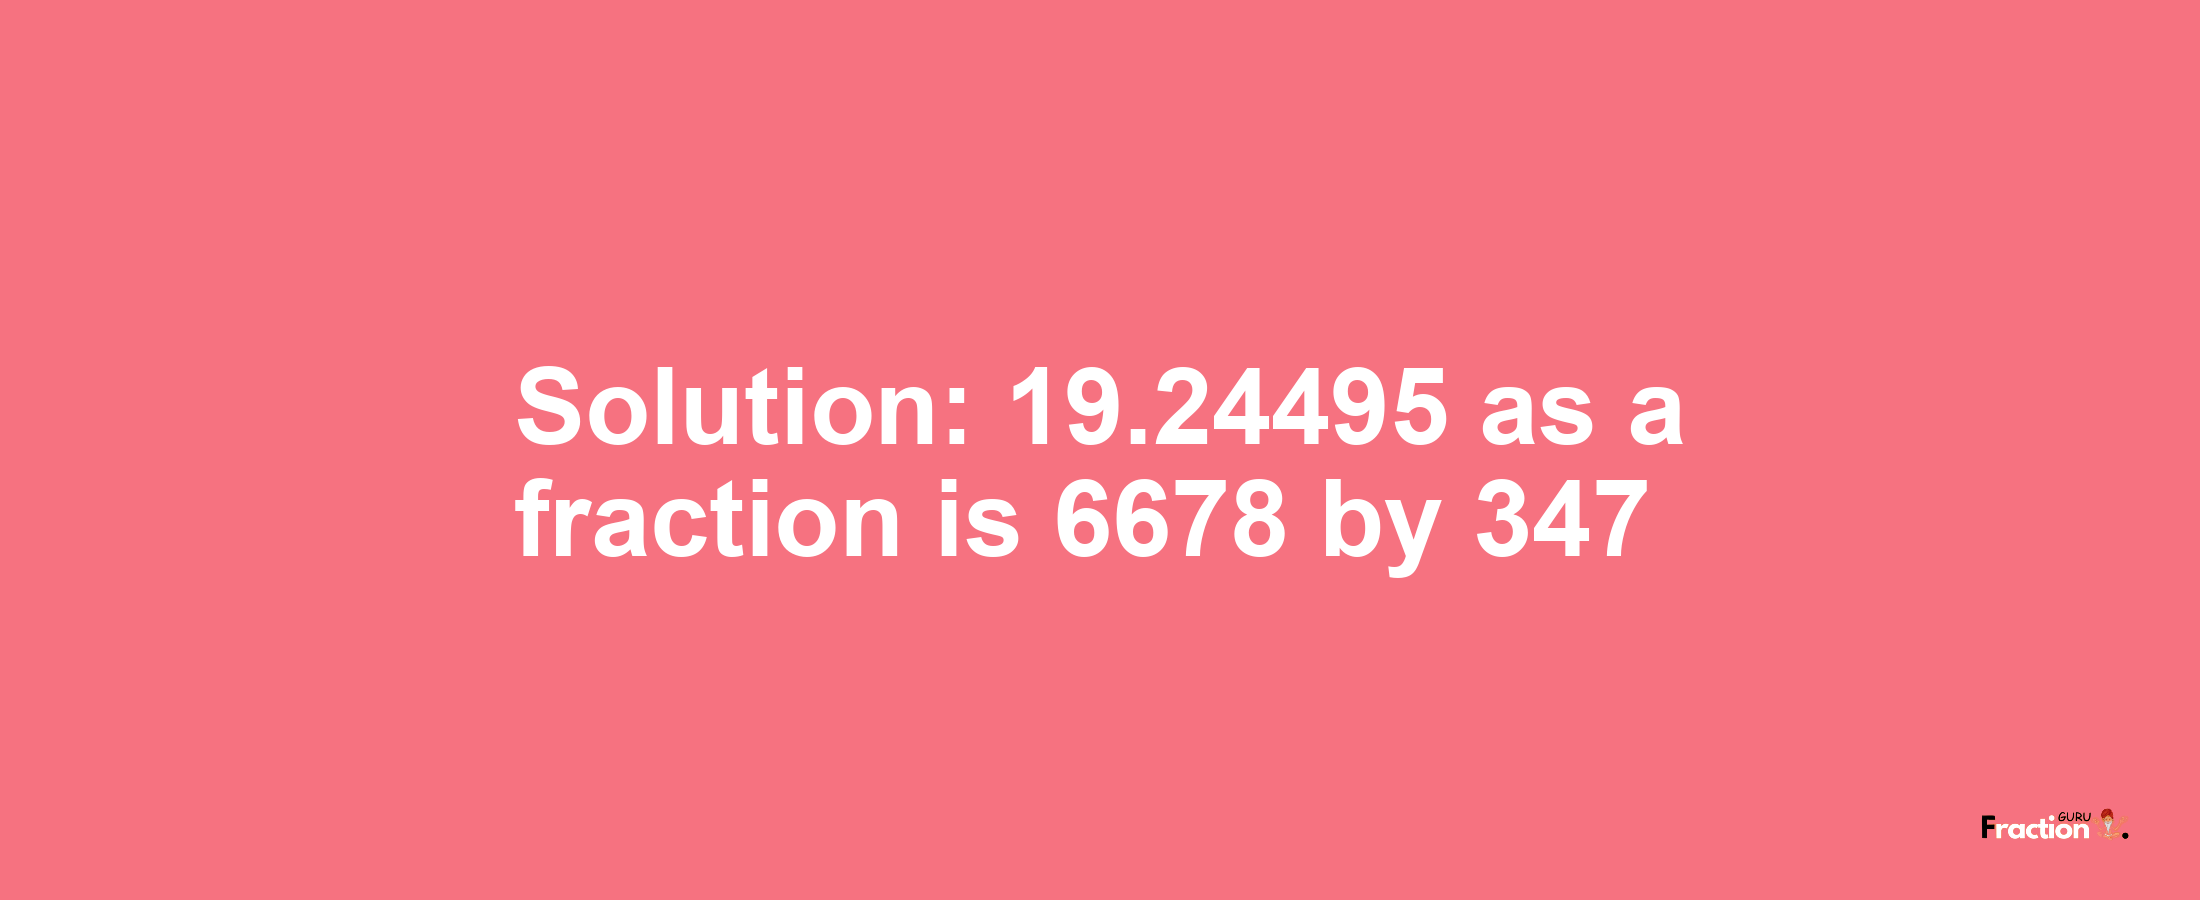 Solution:19.24495 as a fraction is 6678/347